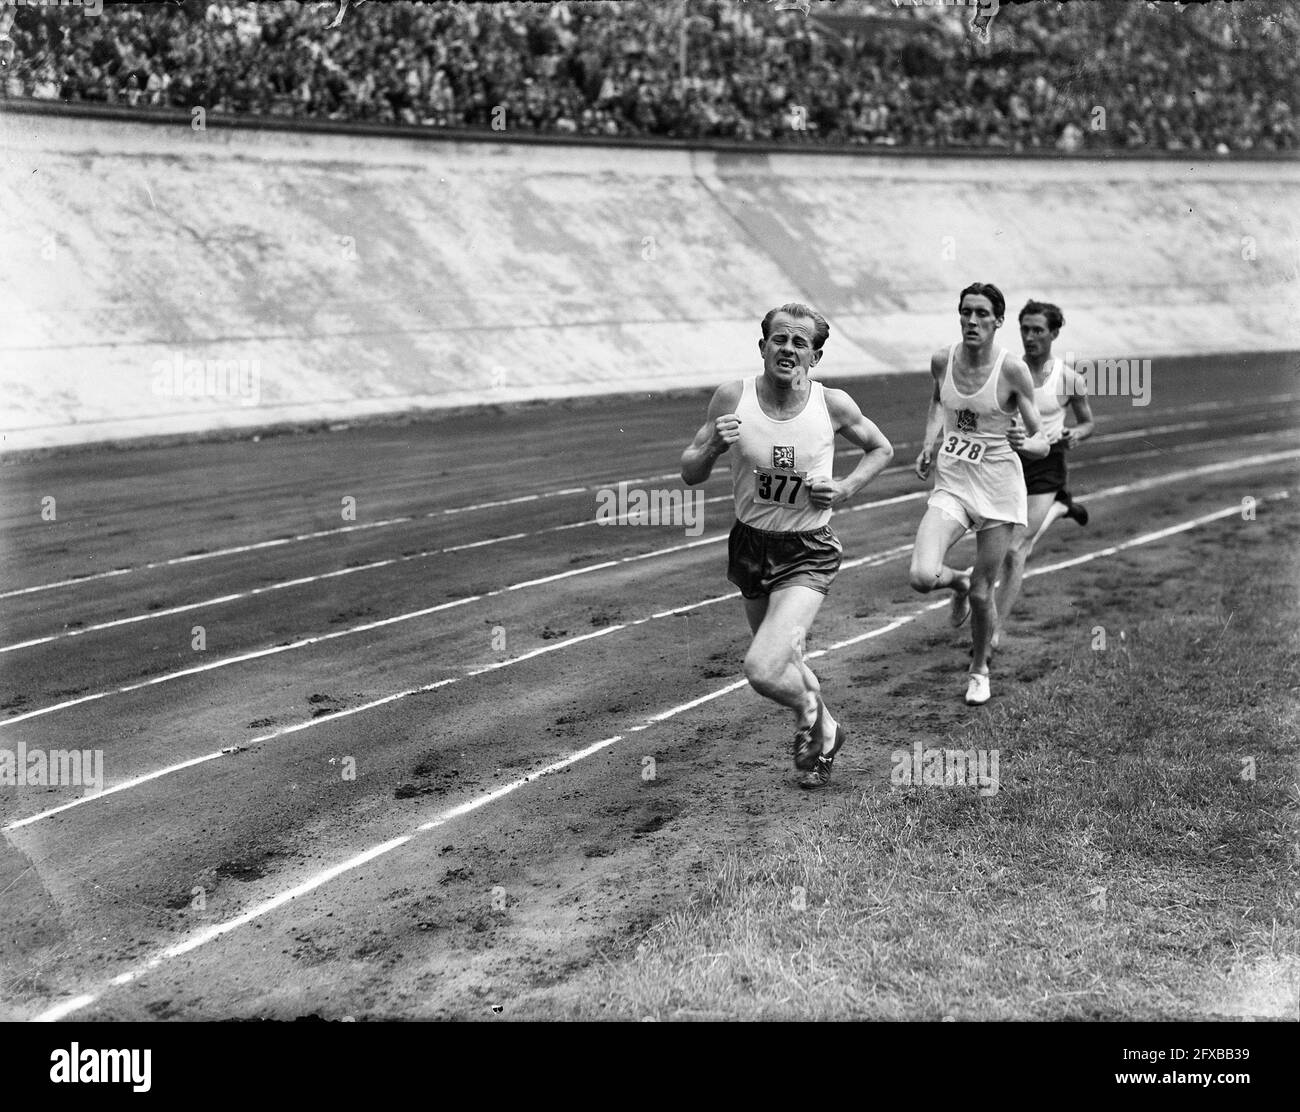 International athletics competition in the Olympic Stadium. Emil Zatopek, August 13, 1948, athletics, sports, The Netherlands, 20th century press agency photo, news to remember, documentary, historic photography 1945-1990, visual stories, human history of the Twentieth Century, capturing moments in time Stock Photo